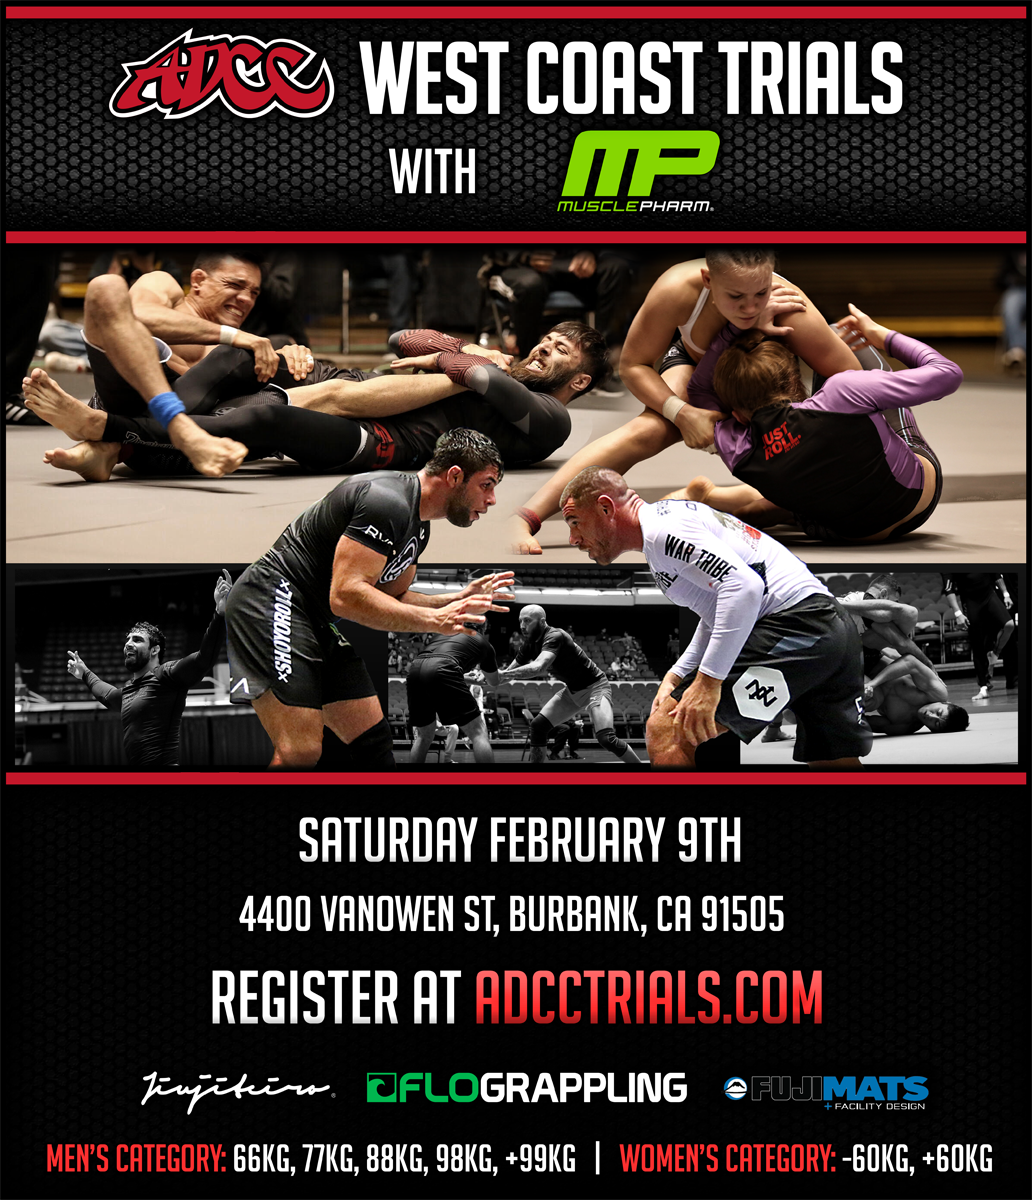 ADCC West Coast Trials Results Slick Submissions and a New King